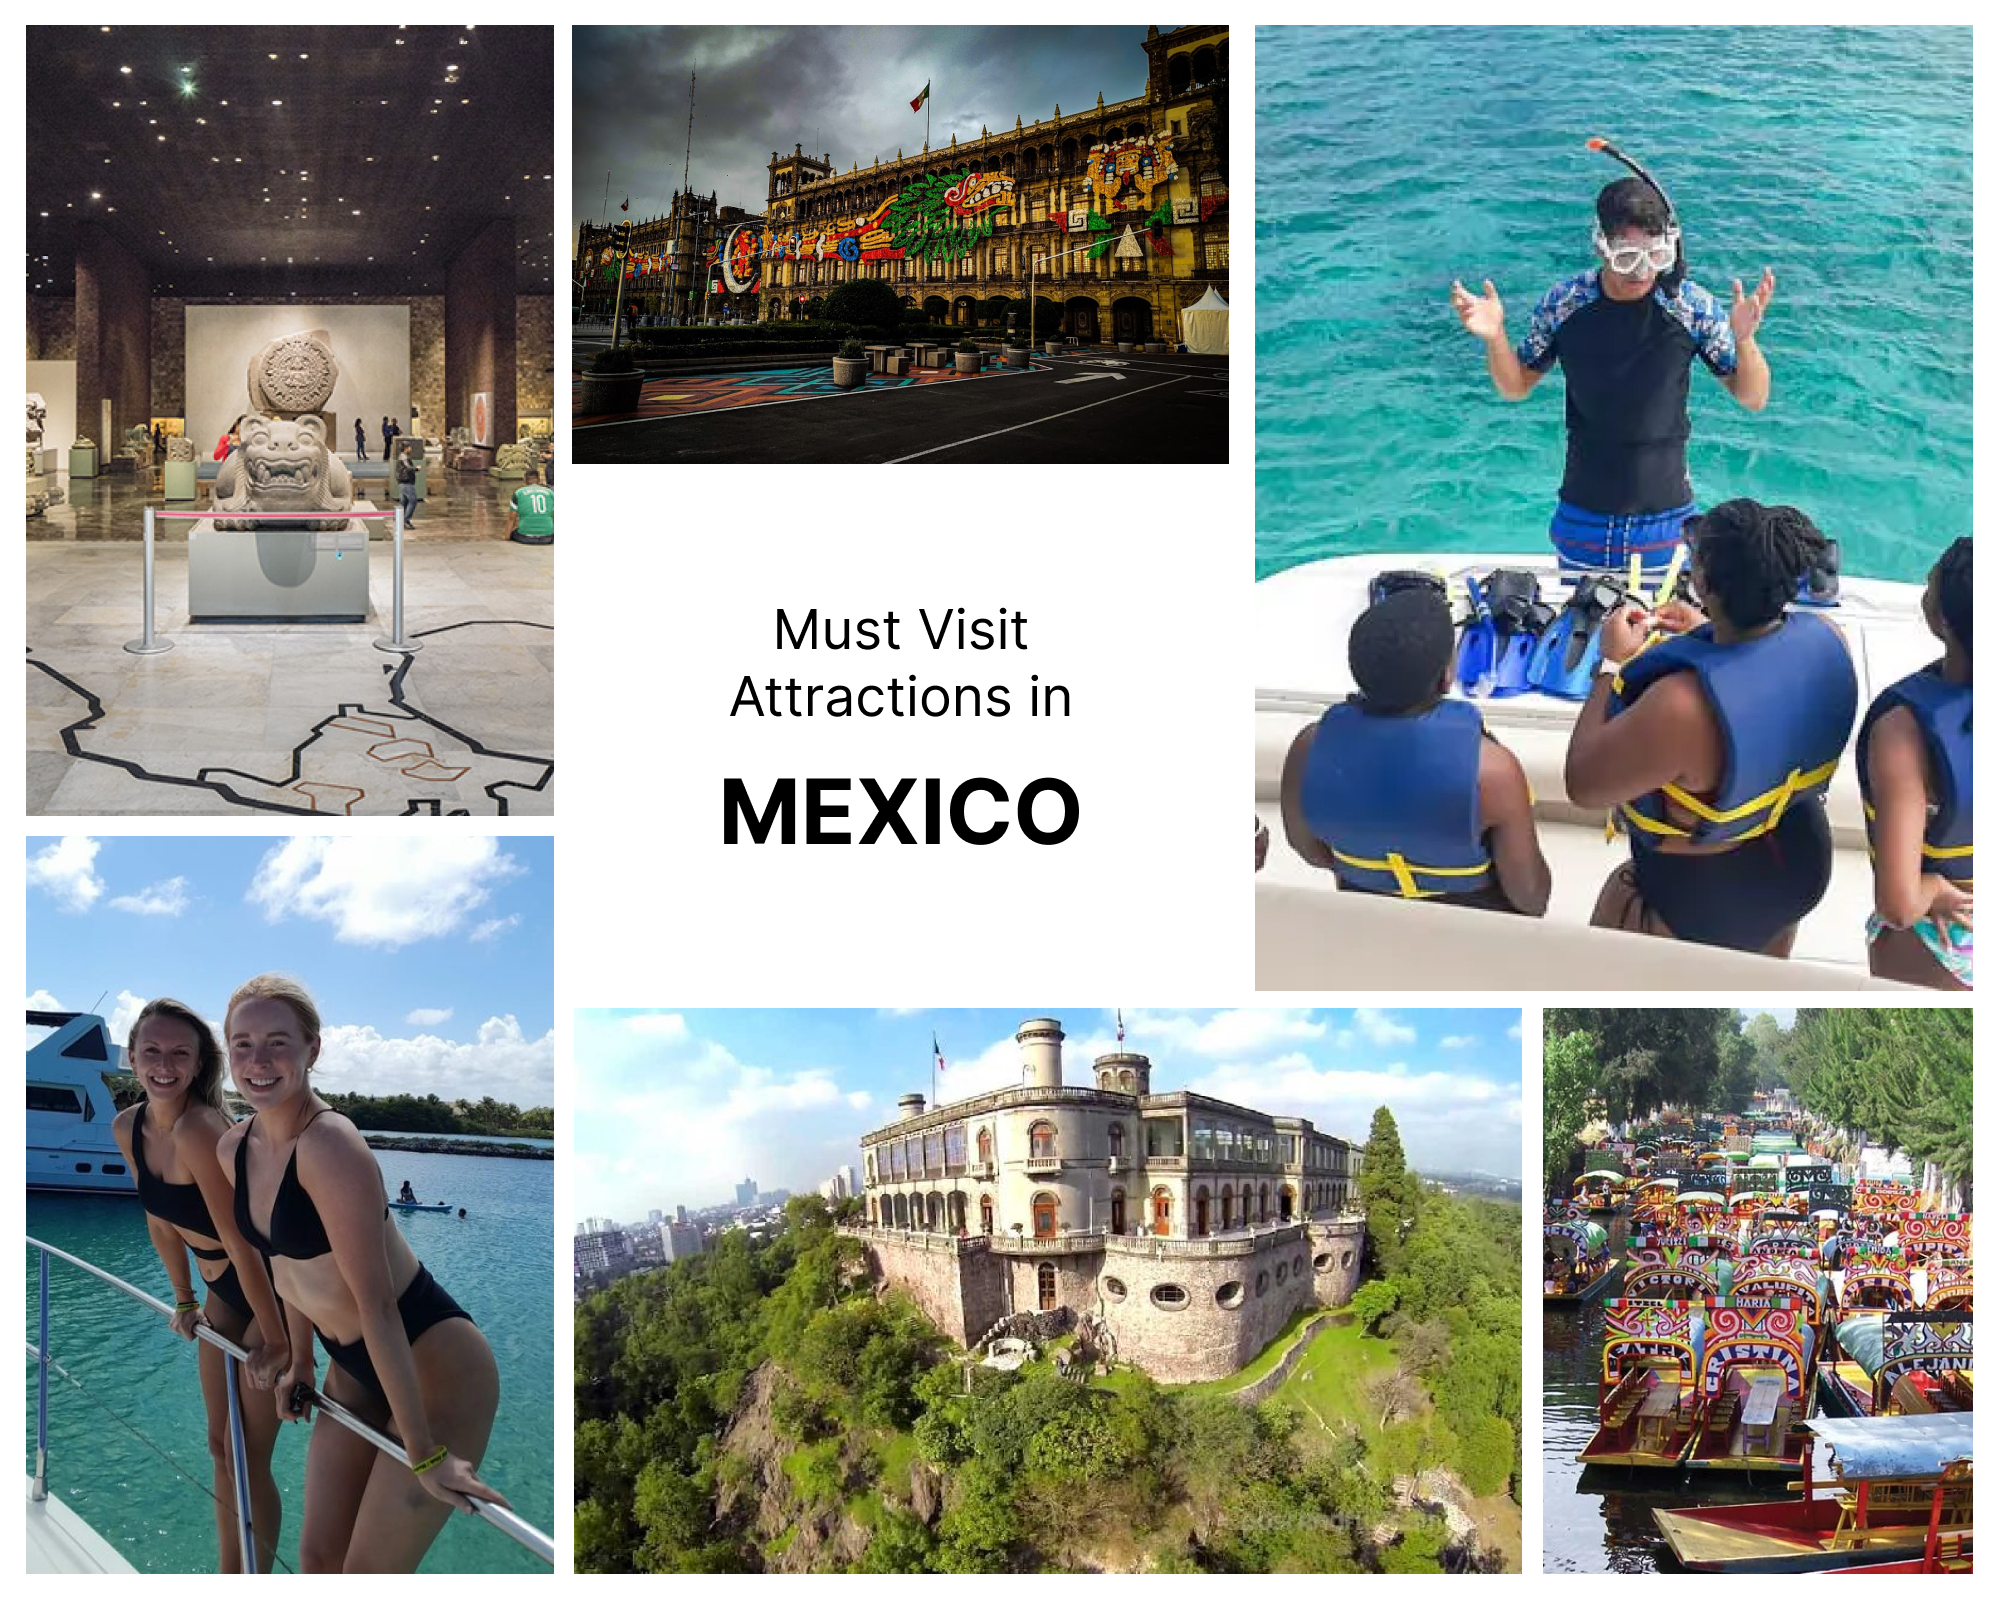 Must Visit Attractions in Mexico